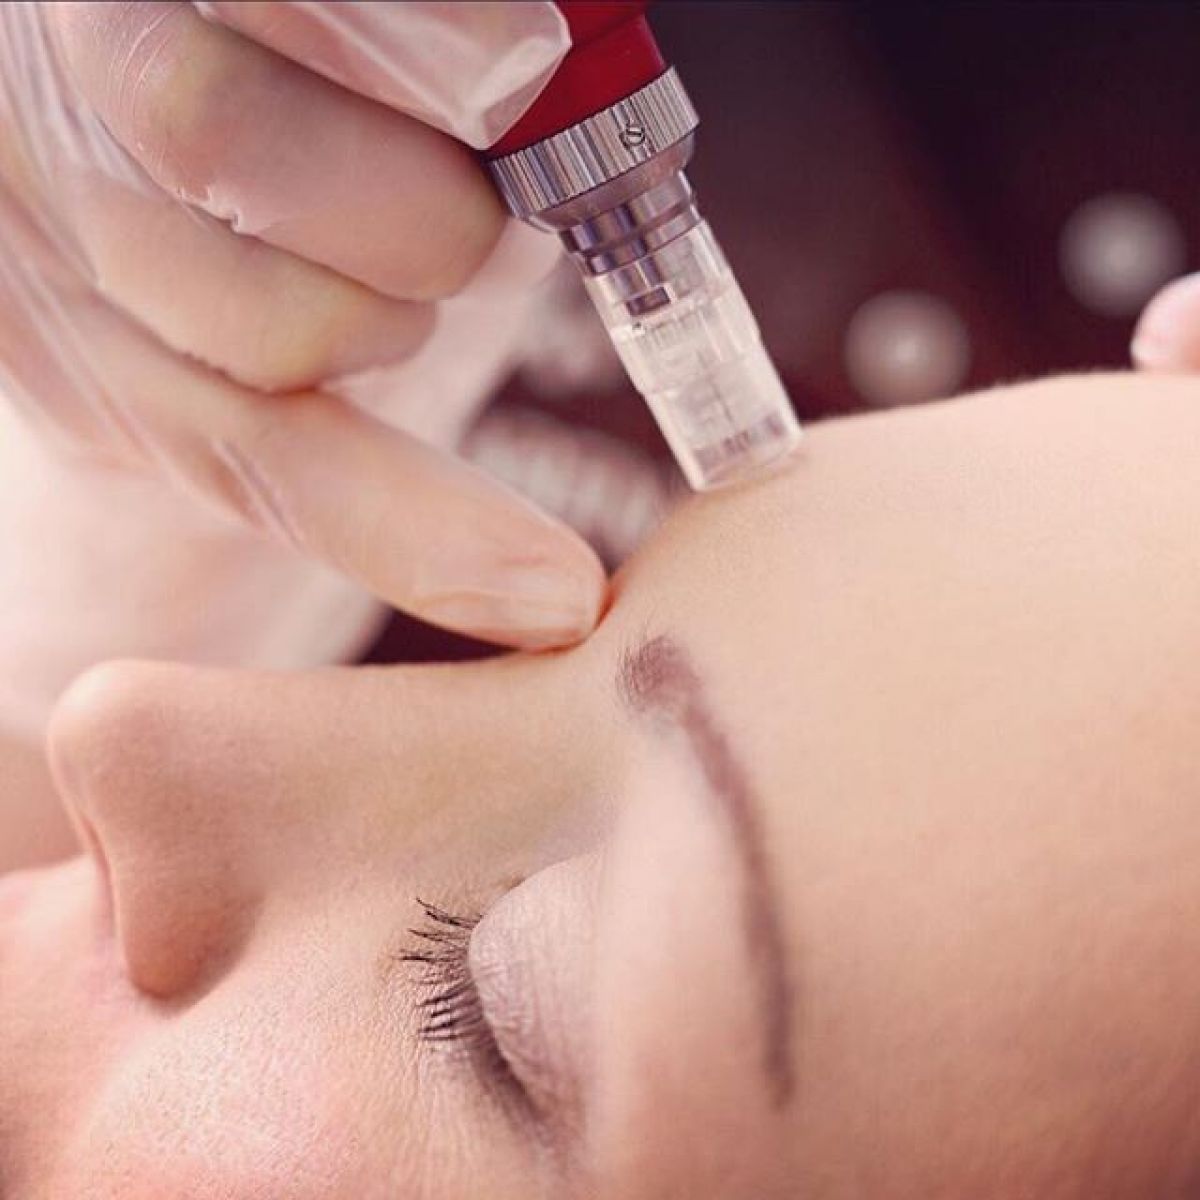 Microniddle Mesotherapy Market